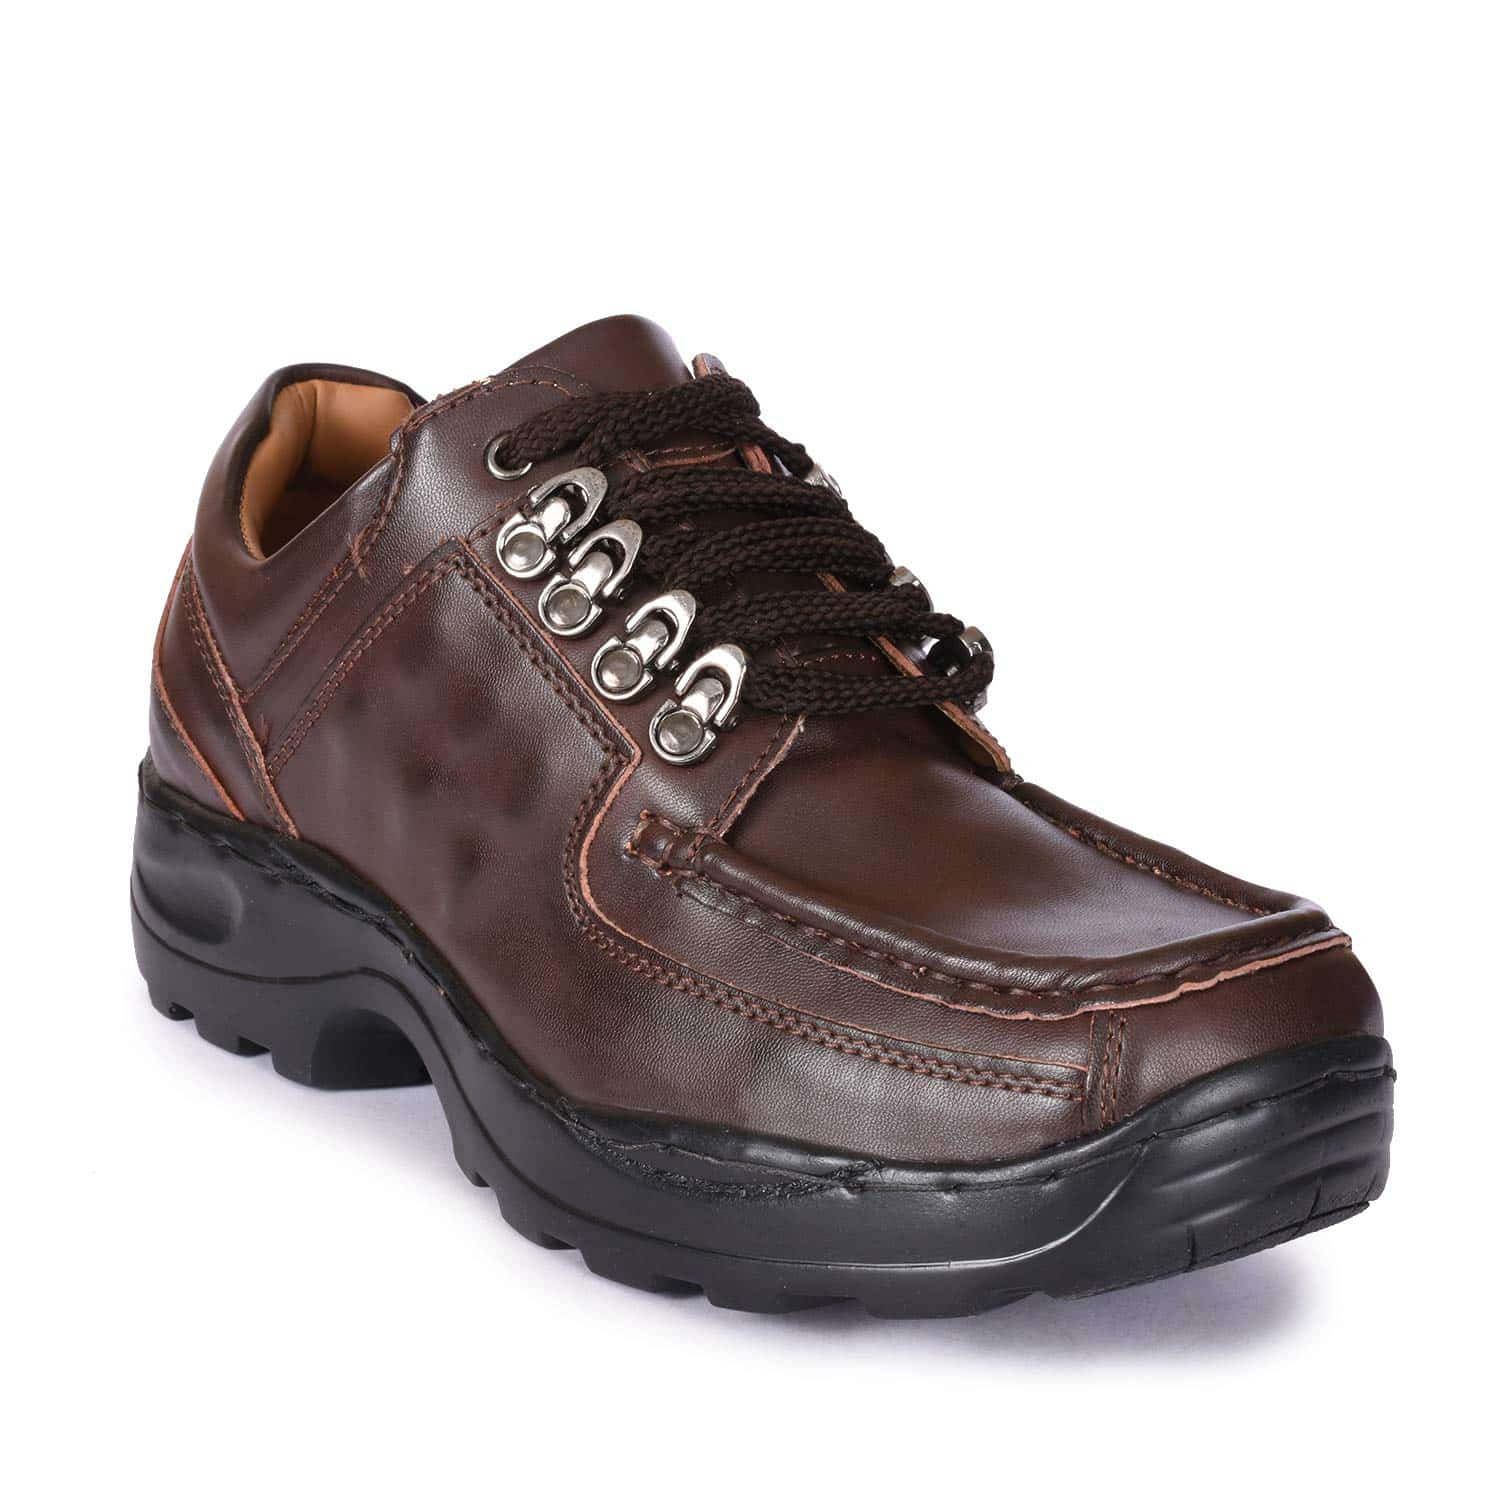 Action Dotcom Men's Extra Cushion Synthetic Leather Boots